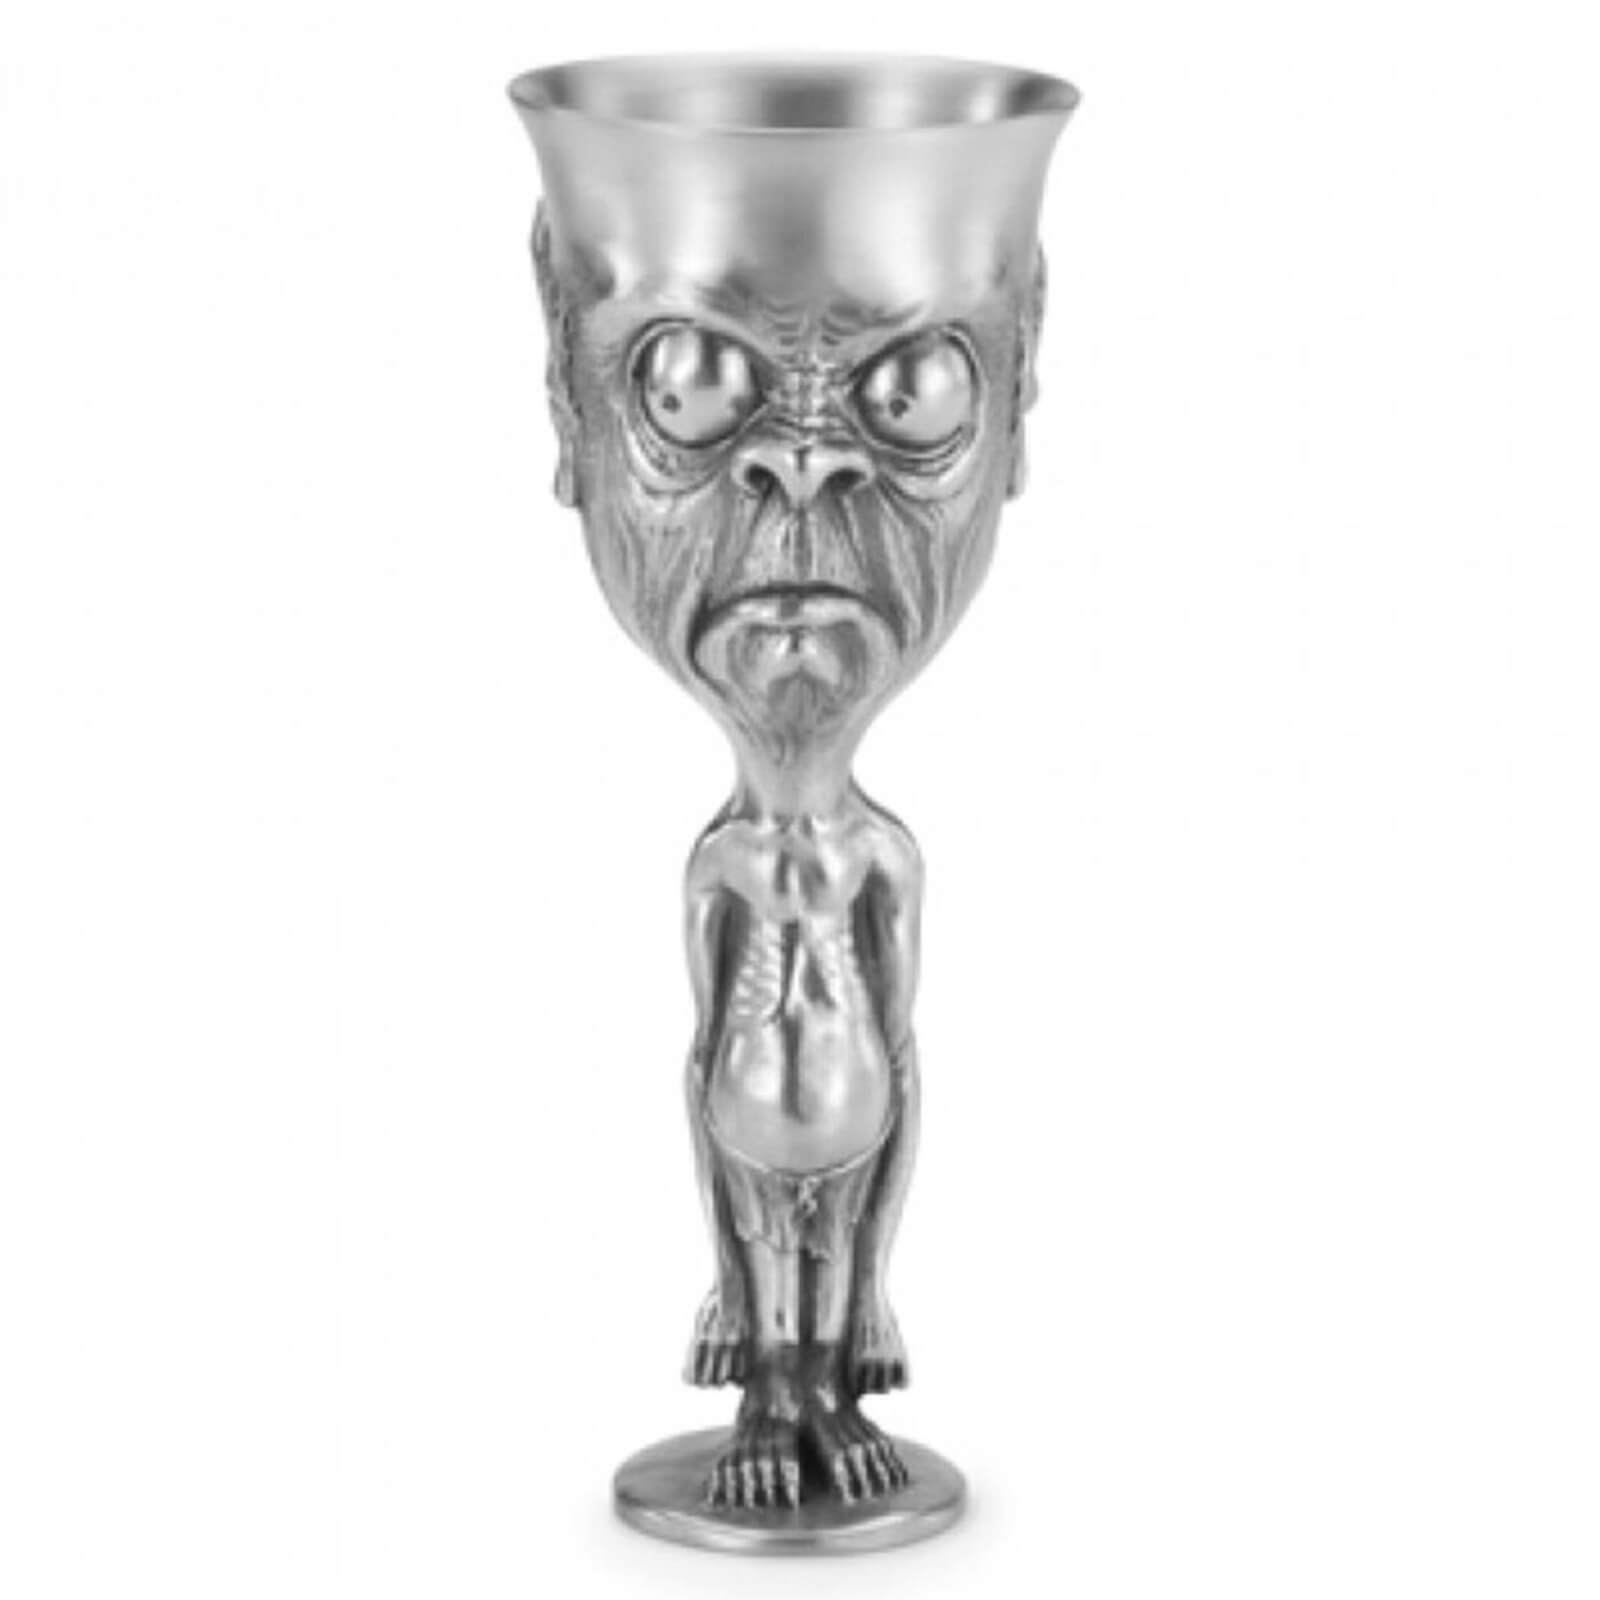 Image of Royal Selangor Lord of the Rings Pewter Goblet - Smeagol Gollum